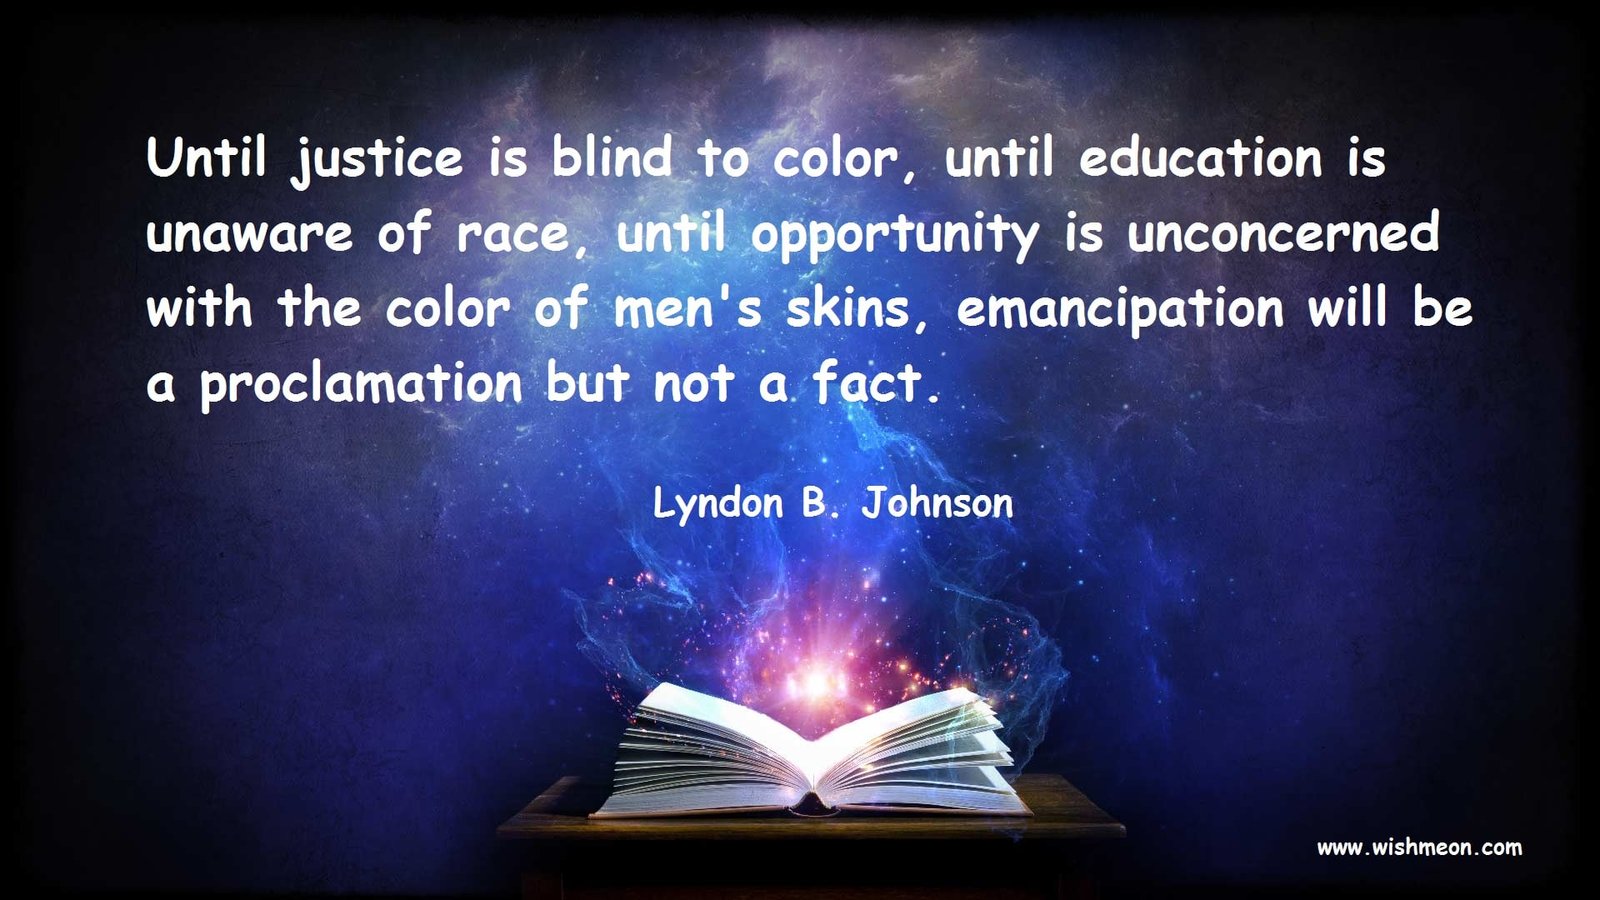 Until justice is blind to color, until education is unaware of race, until opportunity is unconcerned with the color of men's skins, emancipation will be a proclamation but not a fact. L